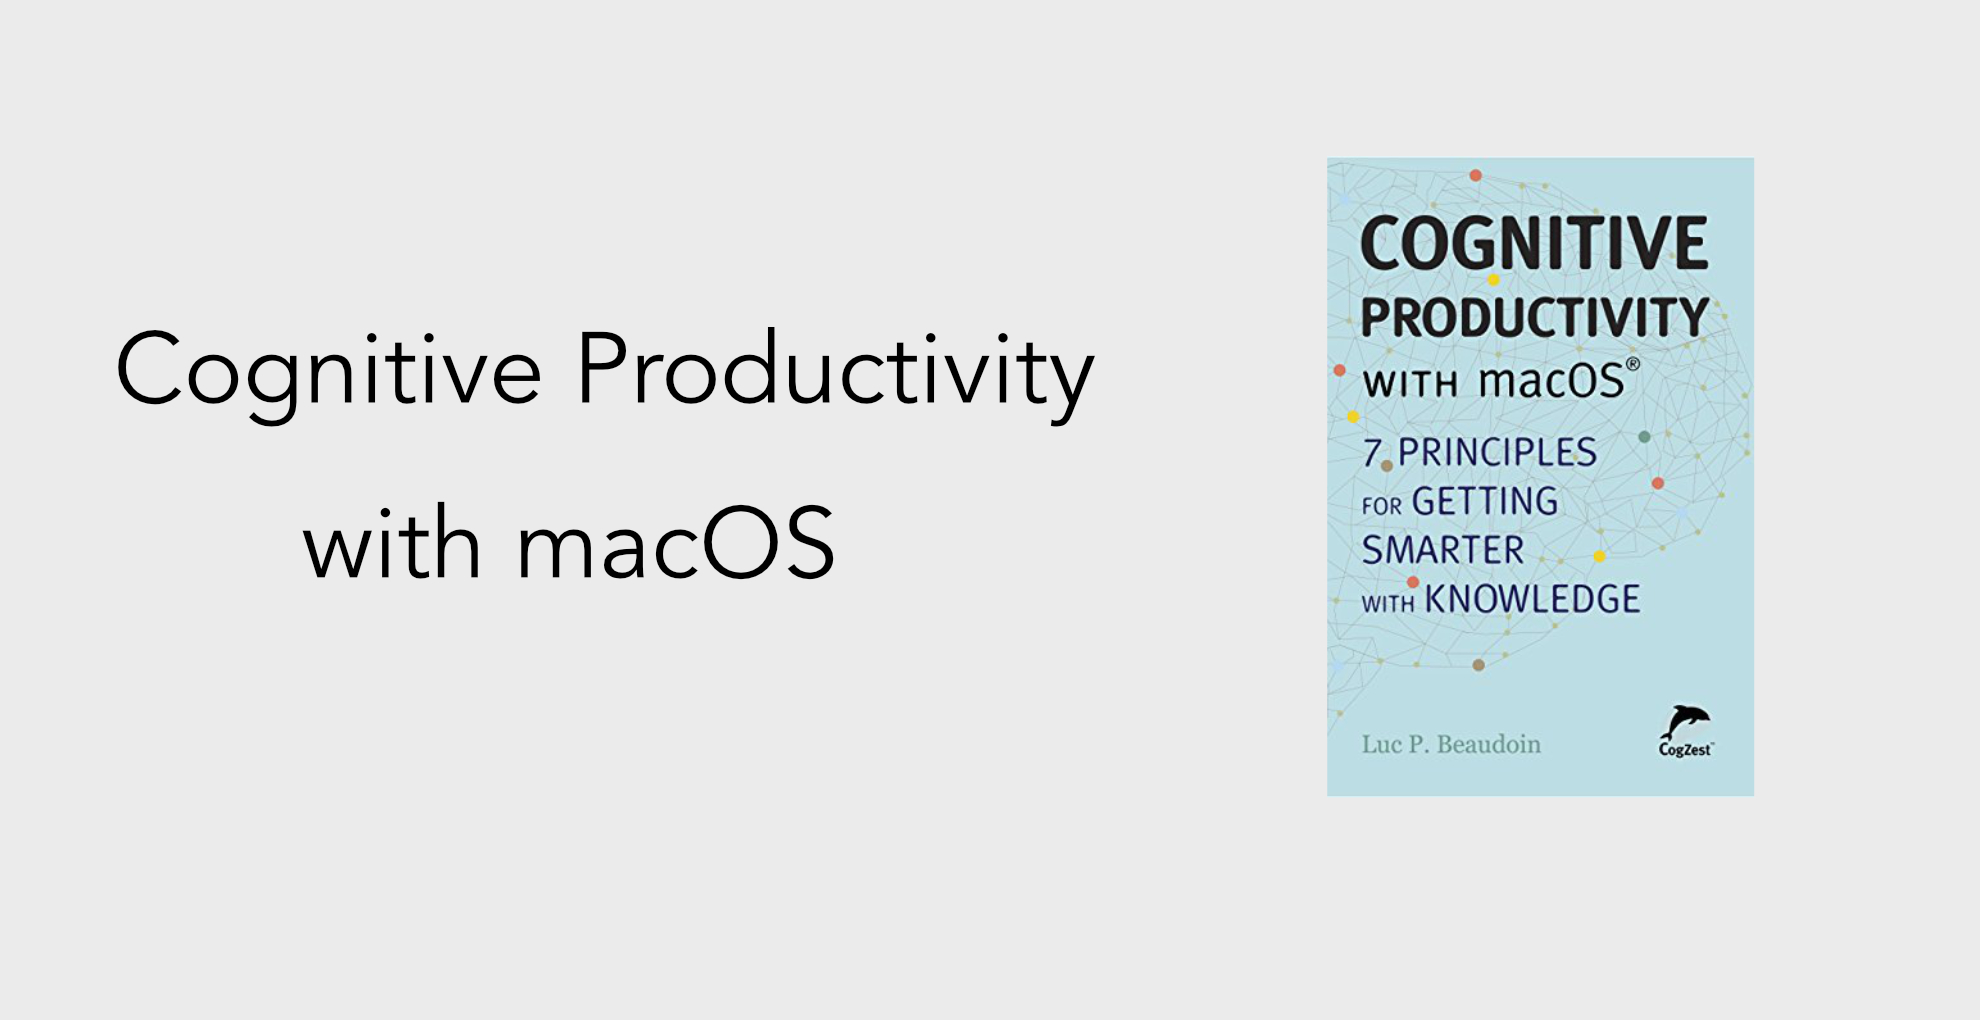 Cognitive Productivity with macOS